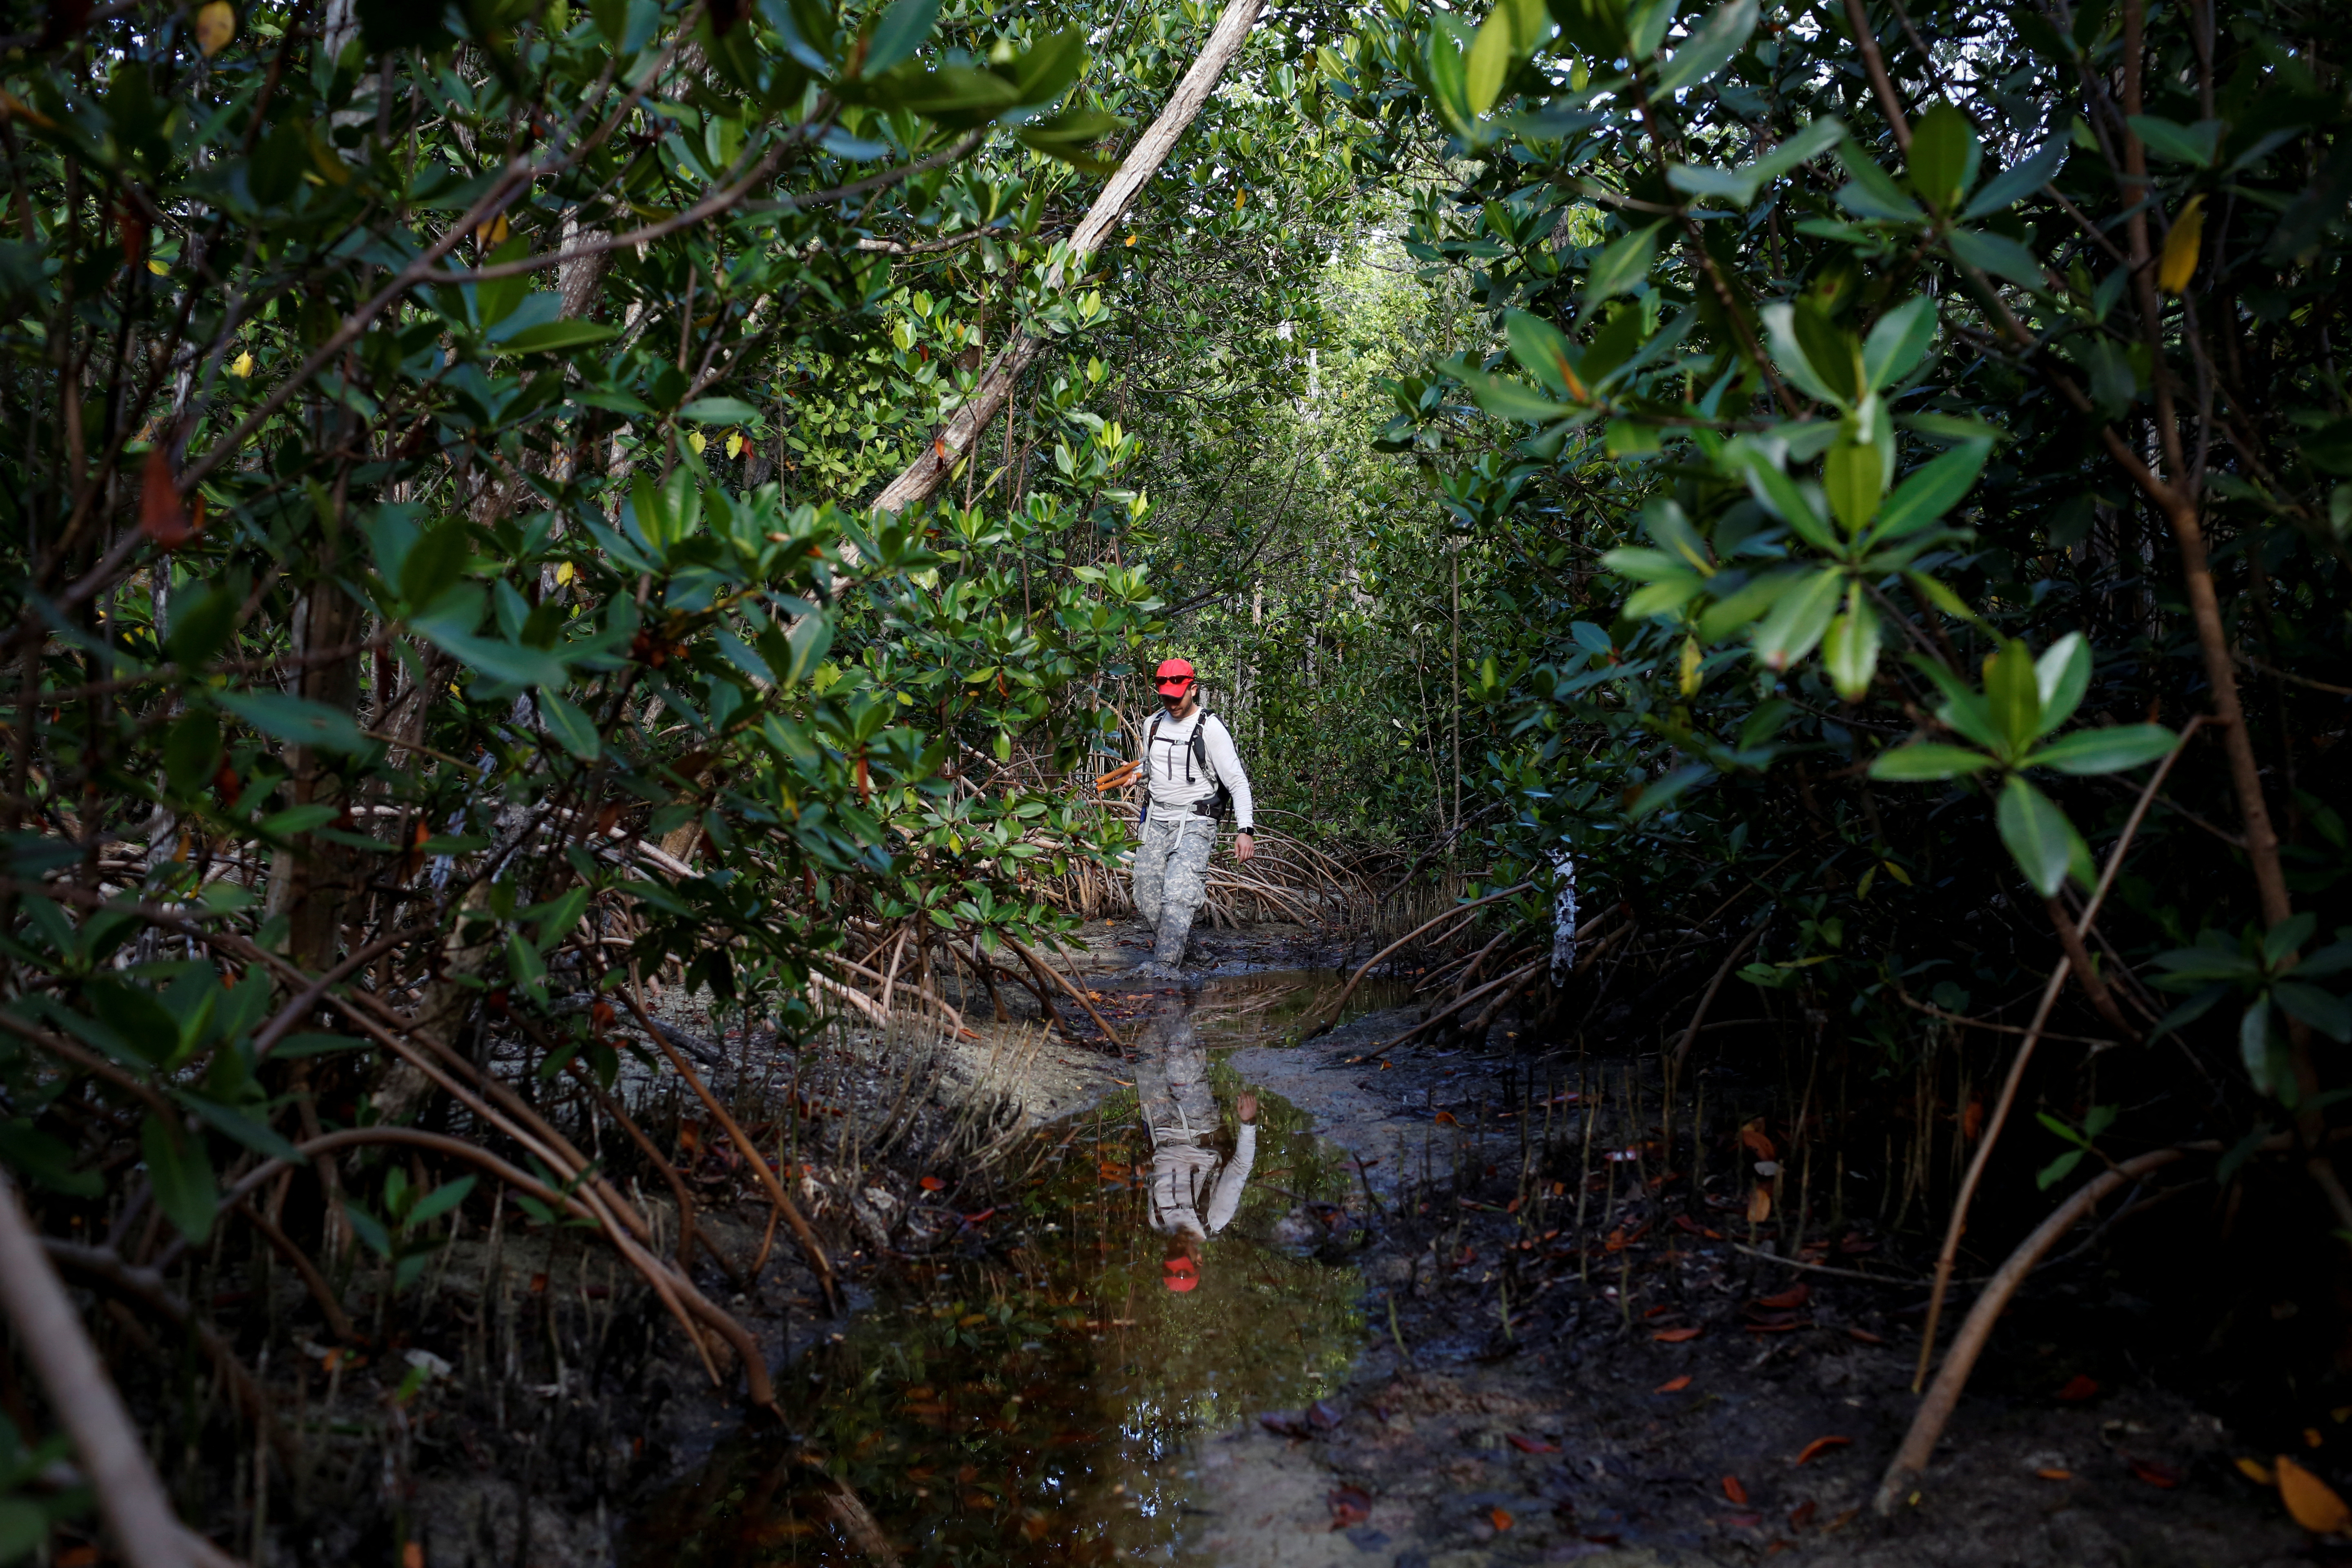 Andrew Otazo has dedicated his free time to removing over 10 tons of trash from South Florida's mangrove forests